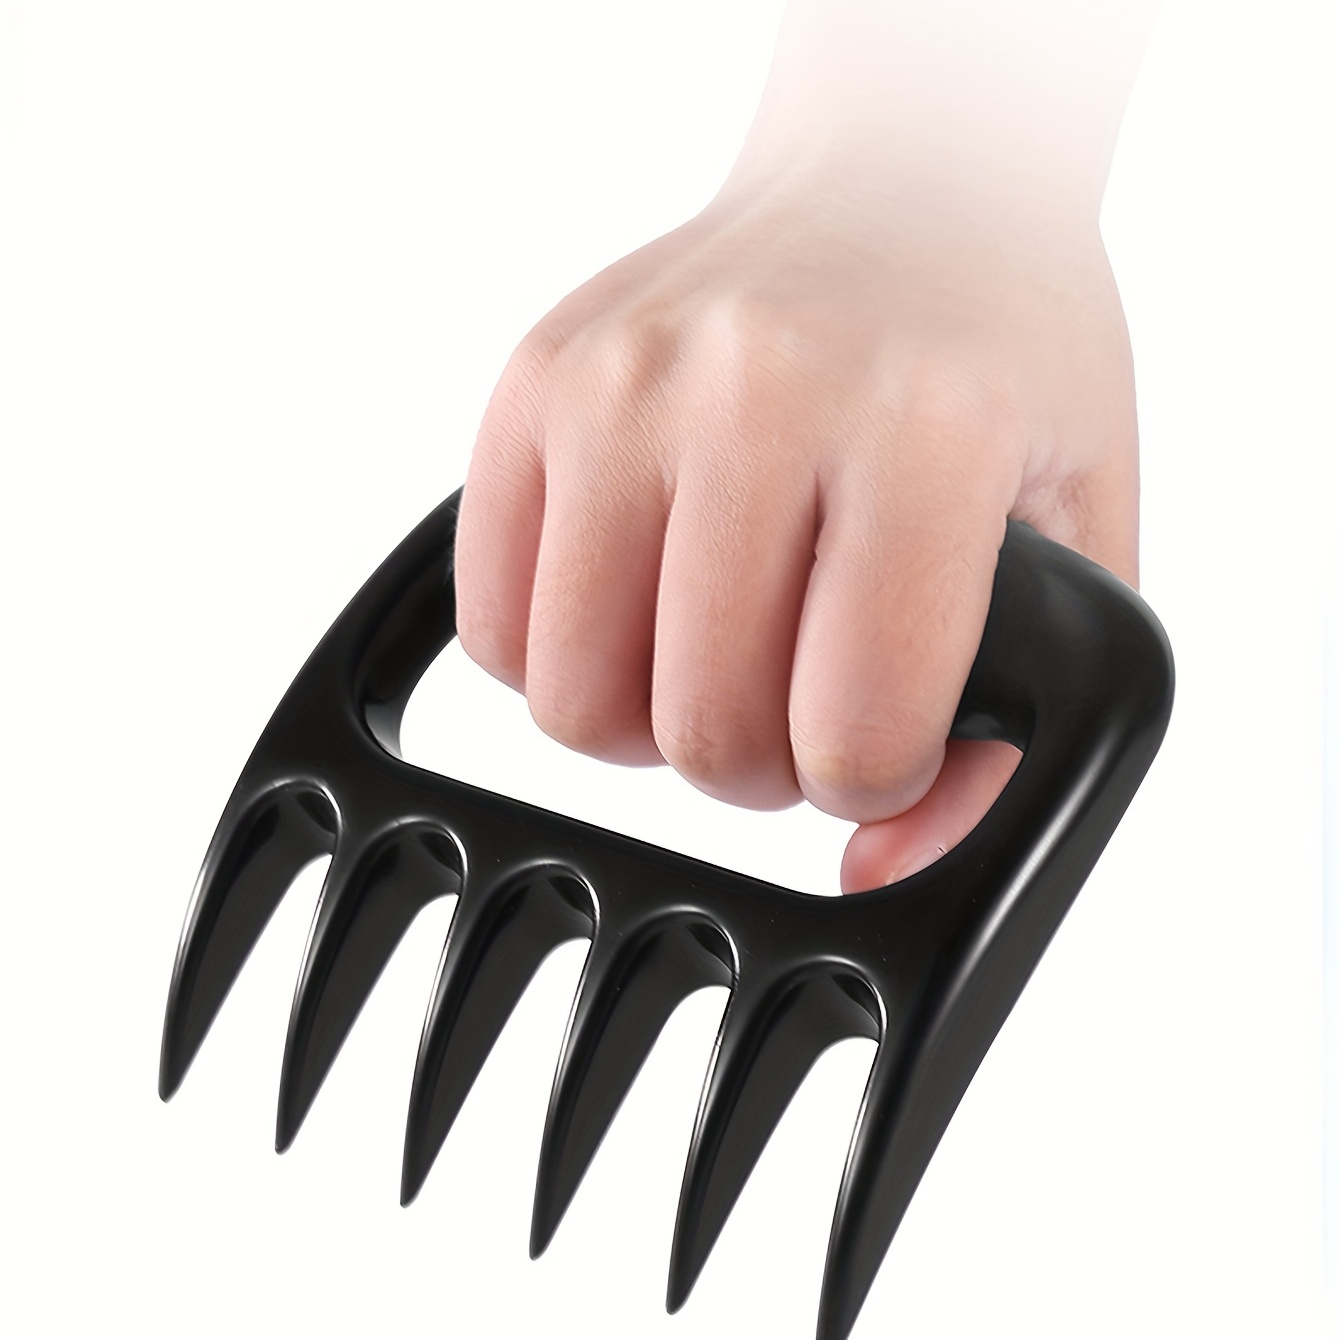 Original Shredder Barbecue Claws, Easily Lift, Handle, Shred, And Cut Meats  Ultra-sharp Blades And Heat Resistant, Meat Crusher Pliers, Heavy Duty Bear  Claw For Chopping Meat, Gifts For Men, Grilling & Barbecue